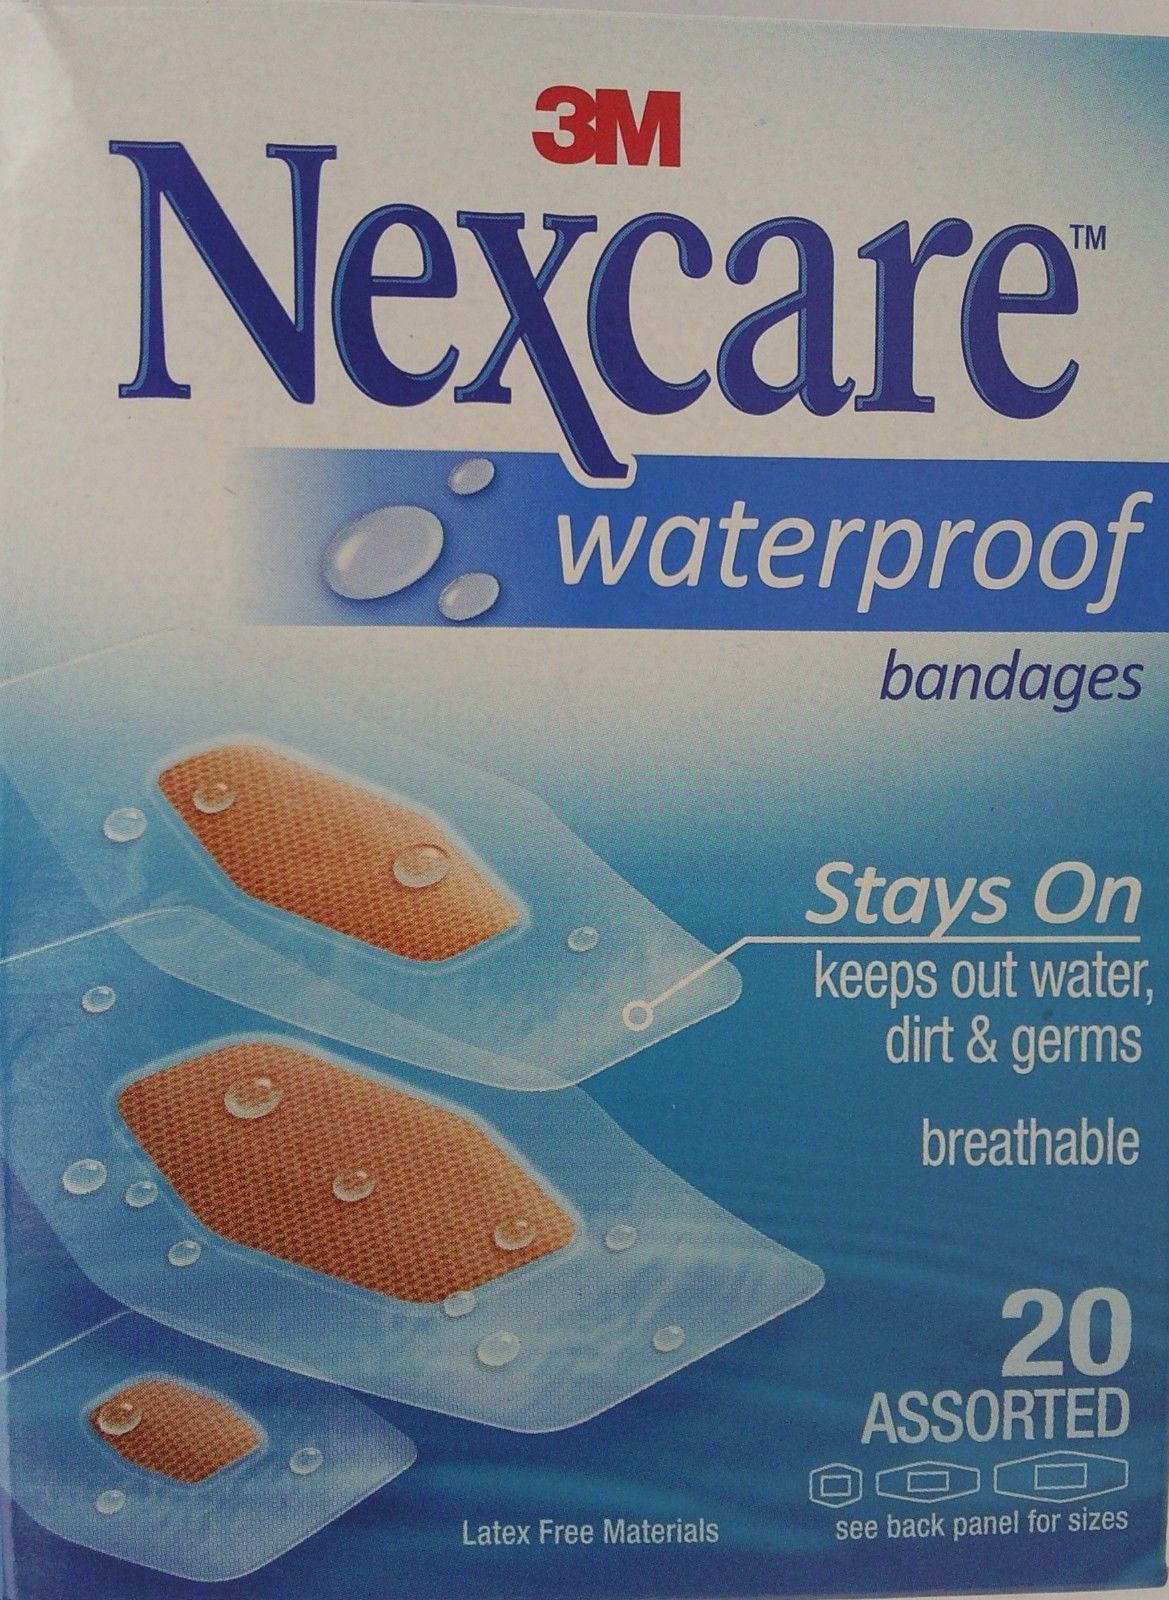 Primary image for 3M NEXCARE WATERPROOF BANDAGES Assorted Sizes Latex Free 20 Ct/Box